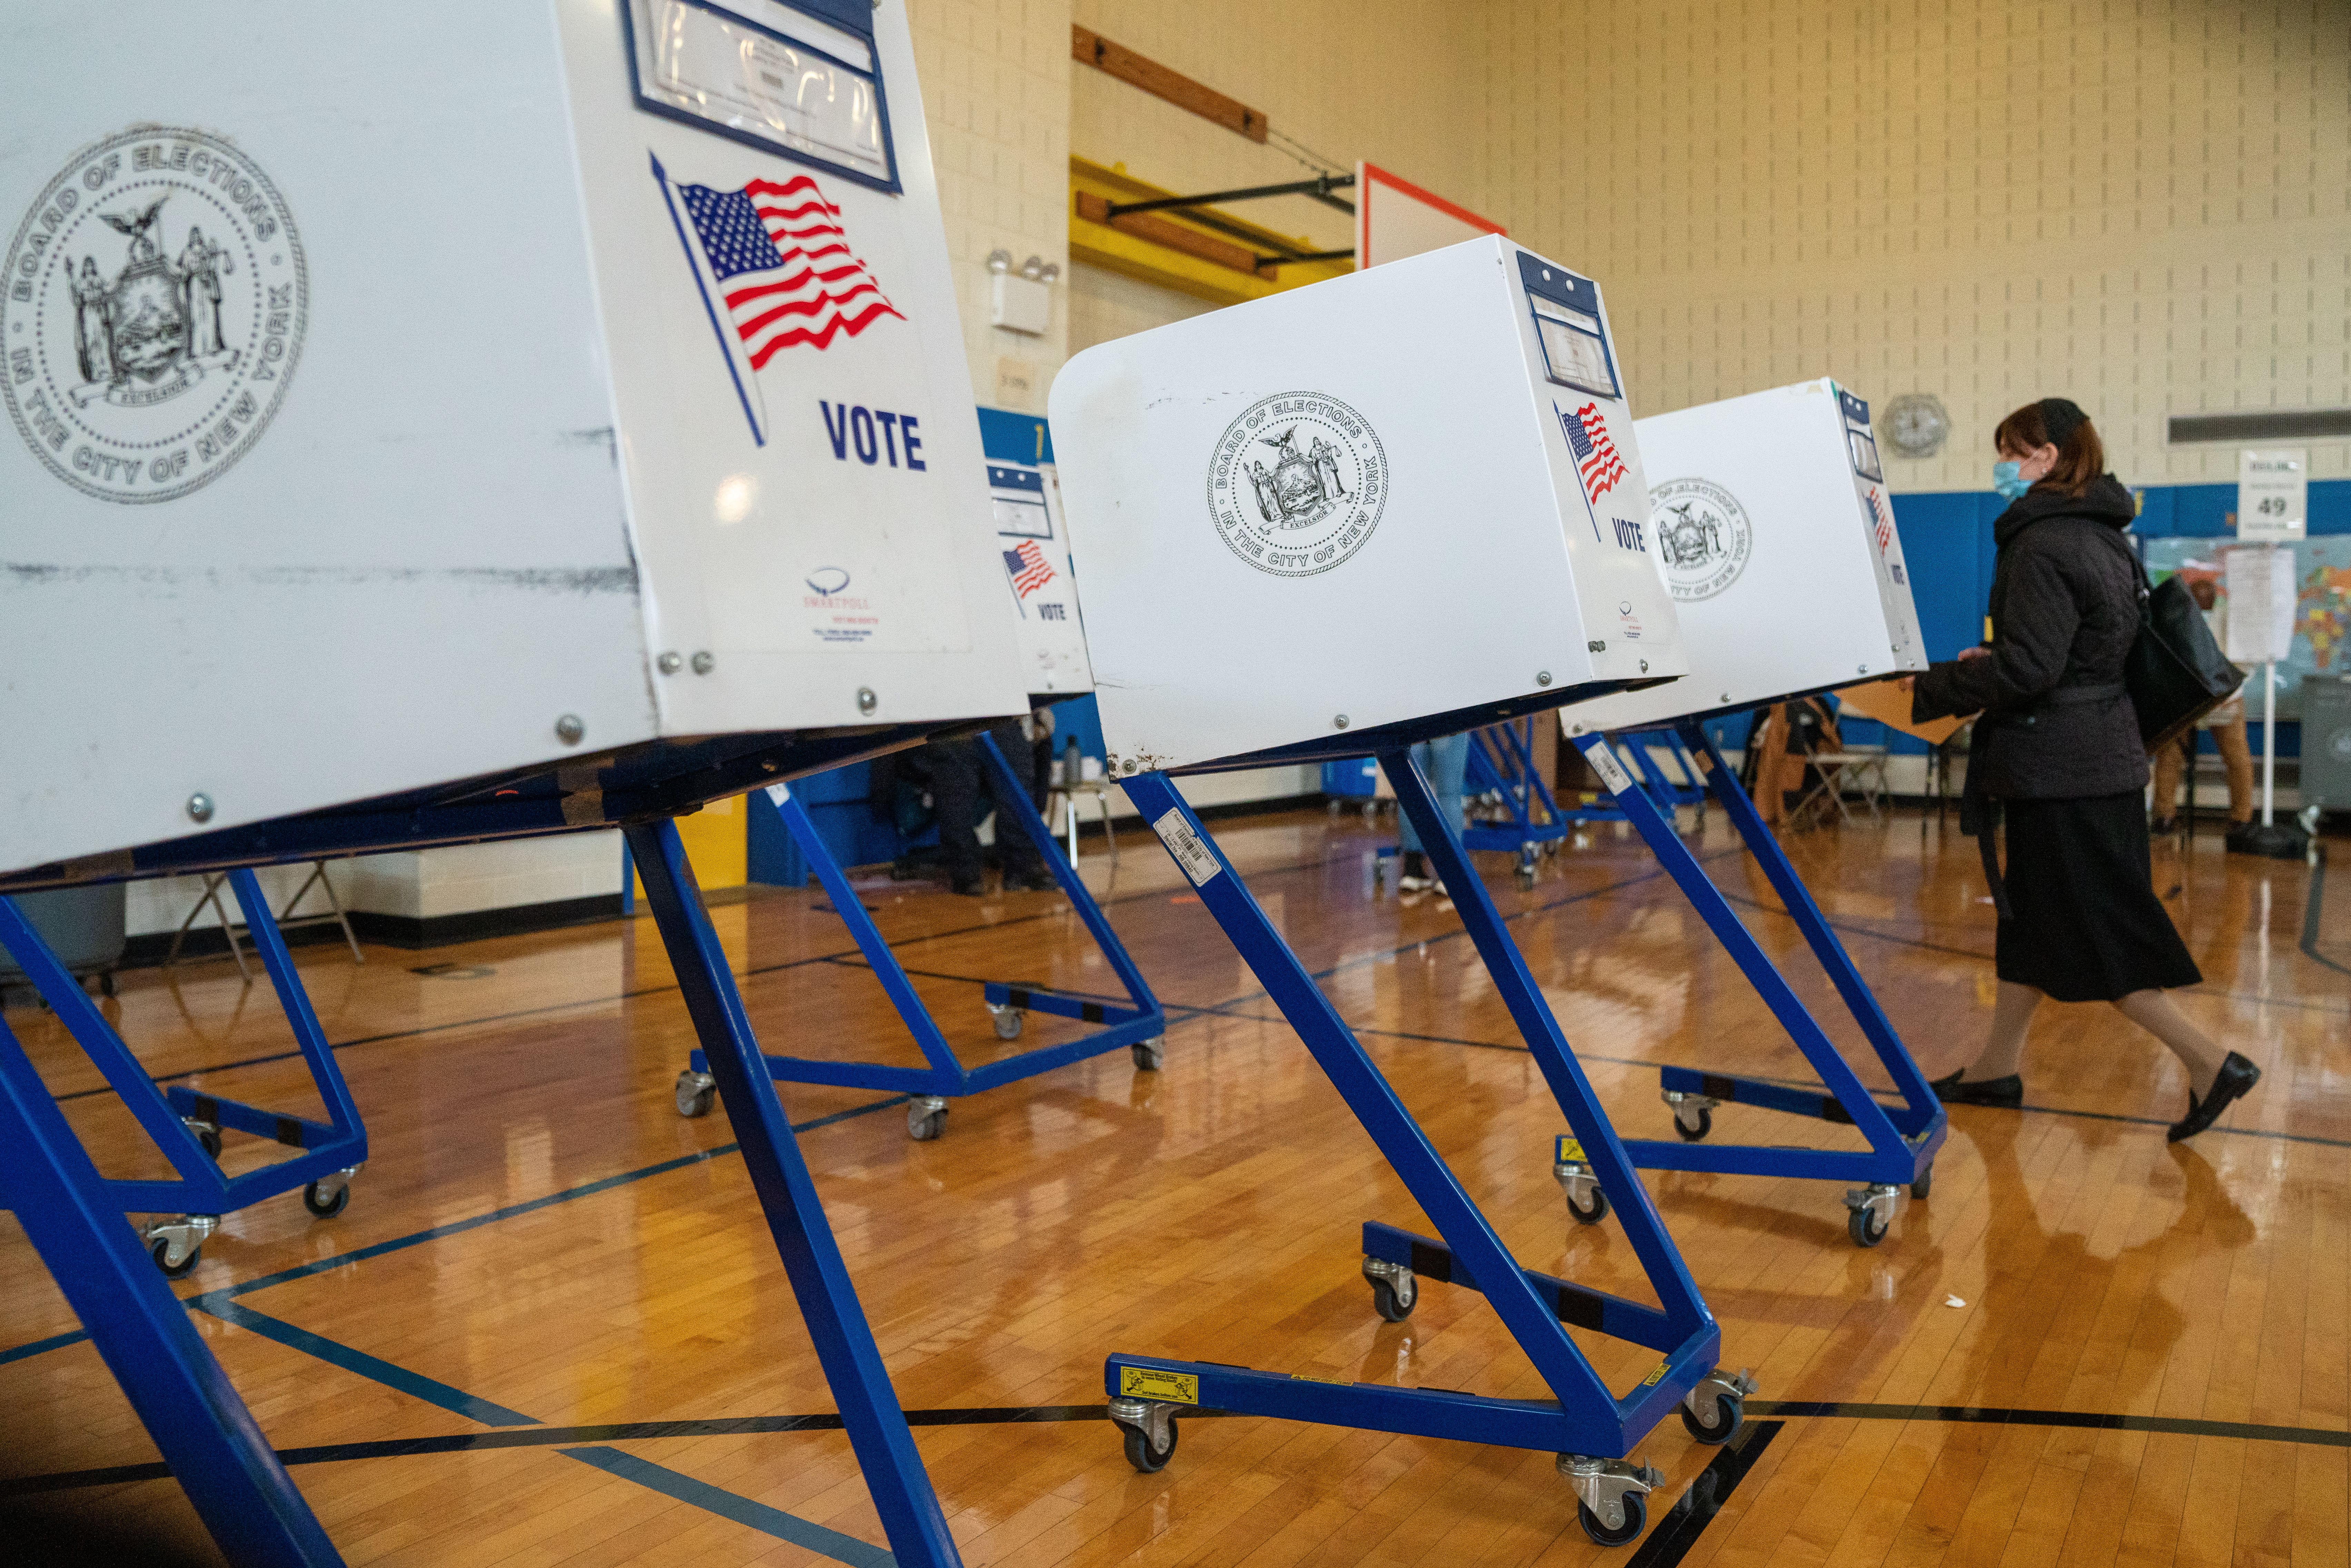 A picture of voting booths.